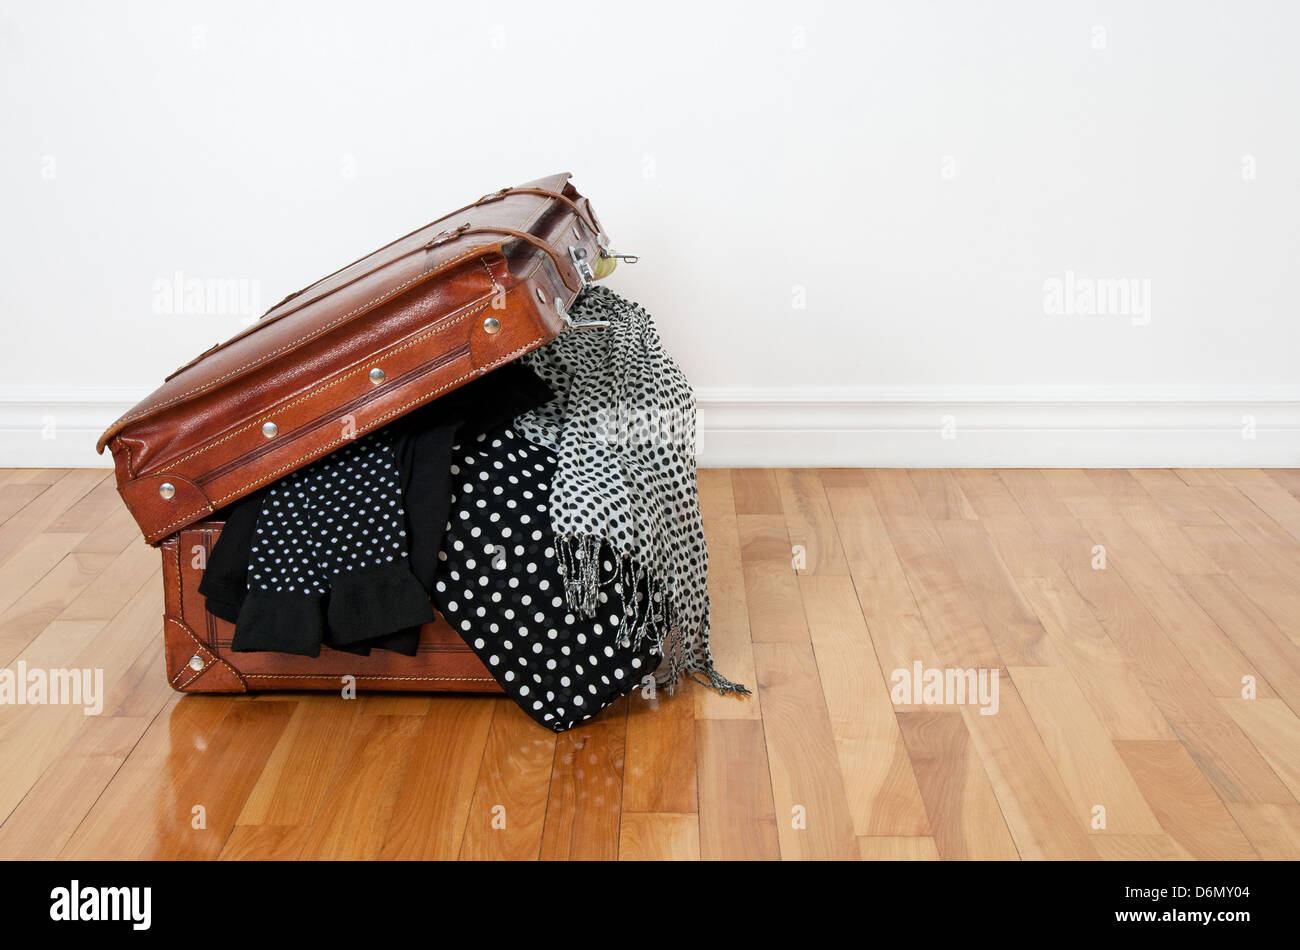 Black and white polka dot clothes in a retro leather suitcase. Stock Photo